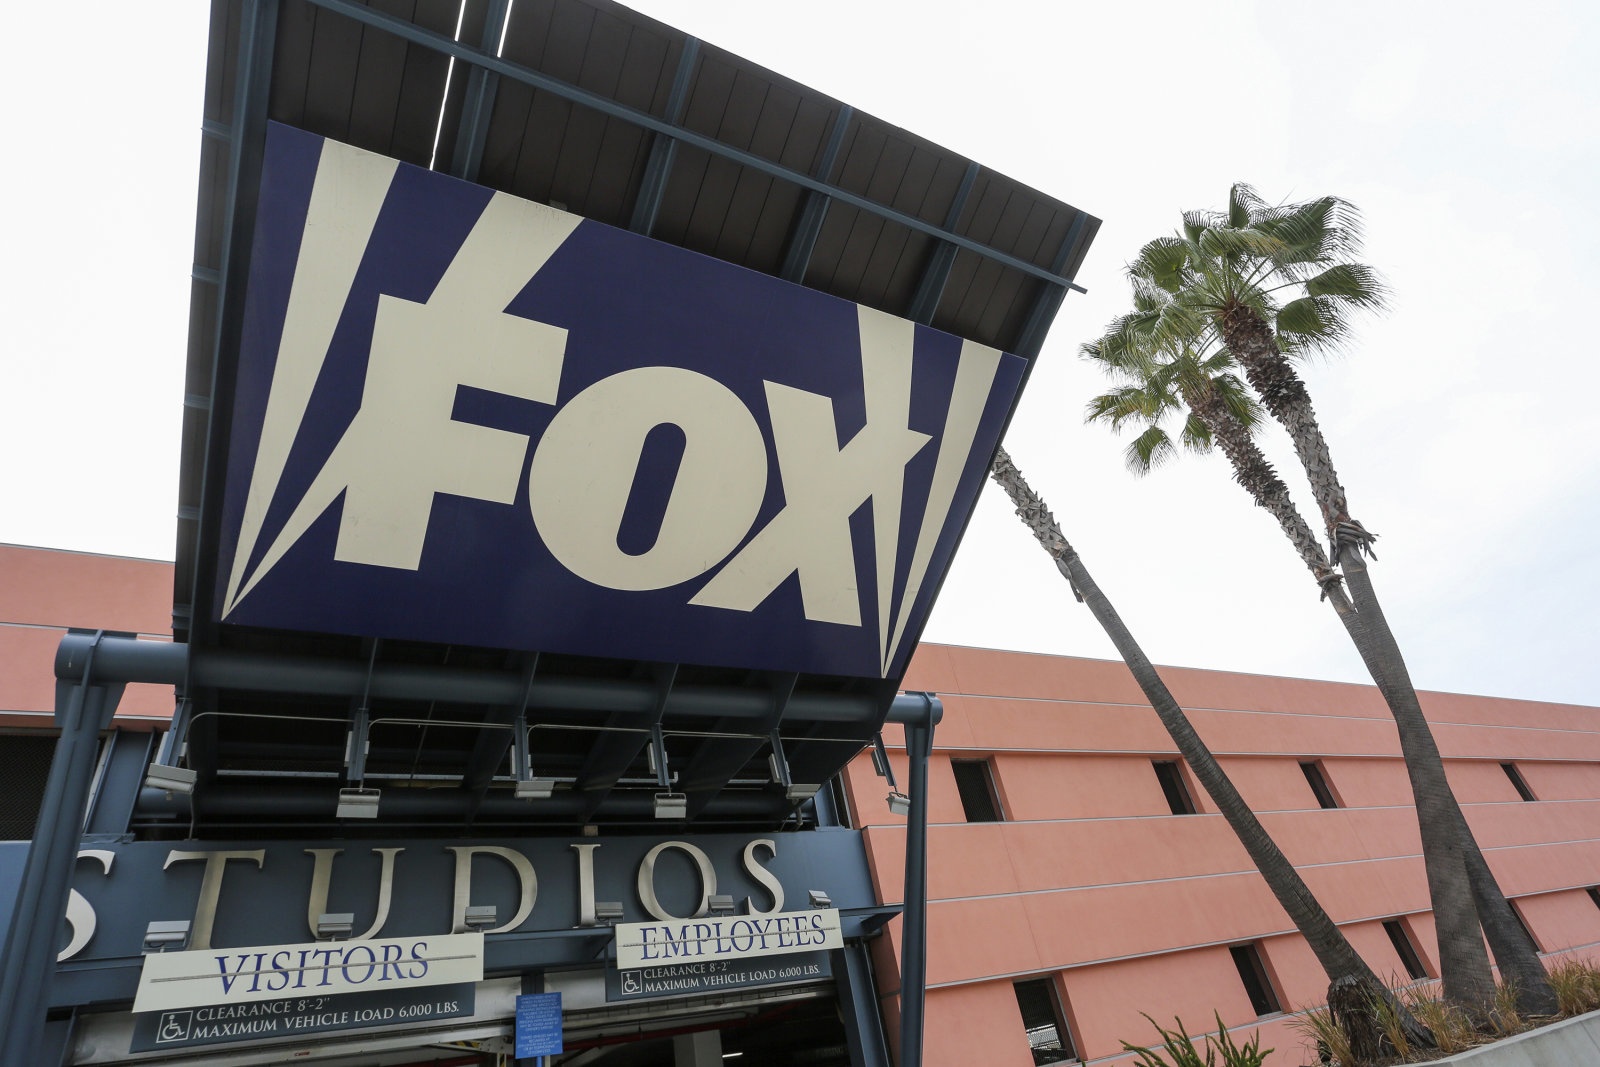 21st Century Fox held talks to sell most of its assets to Disney